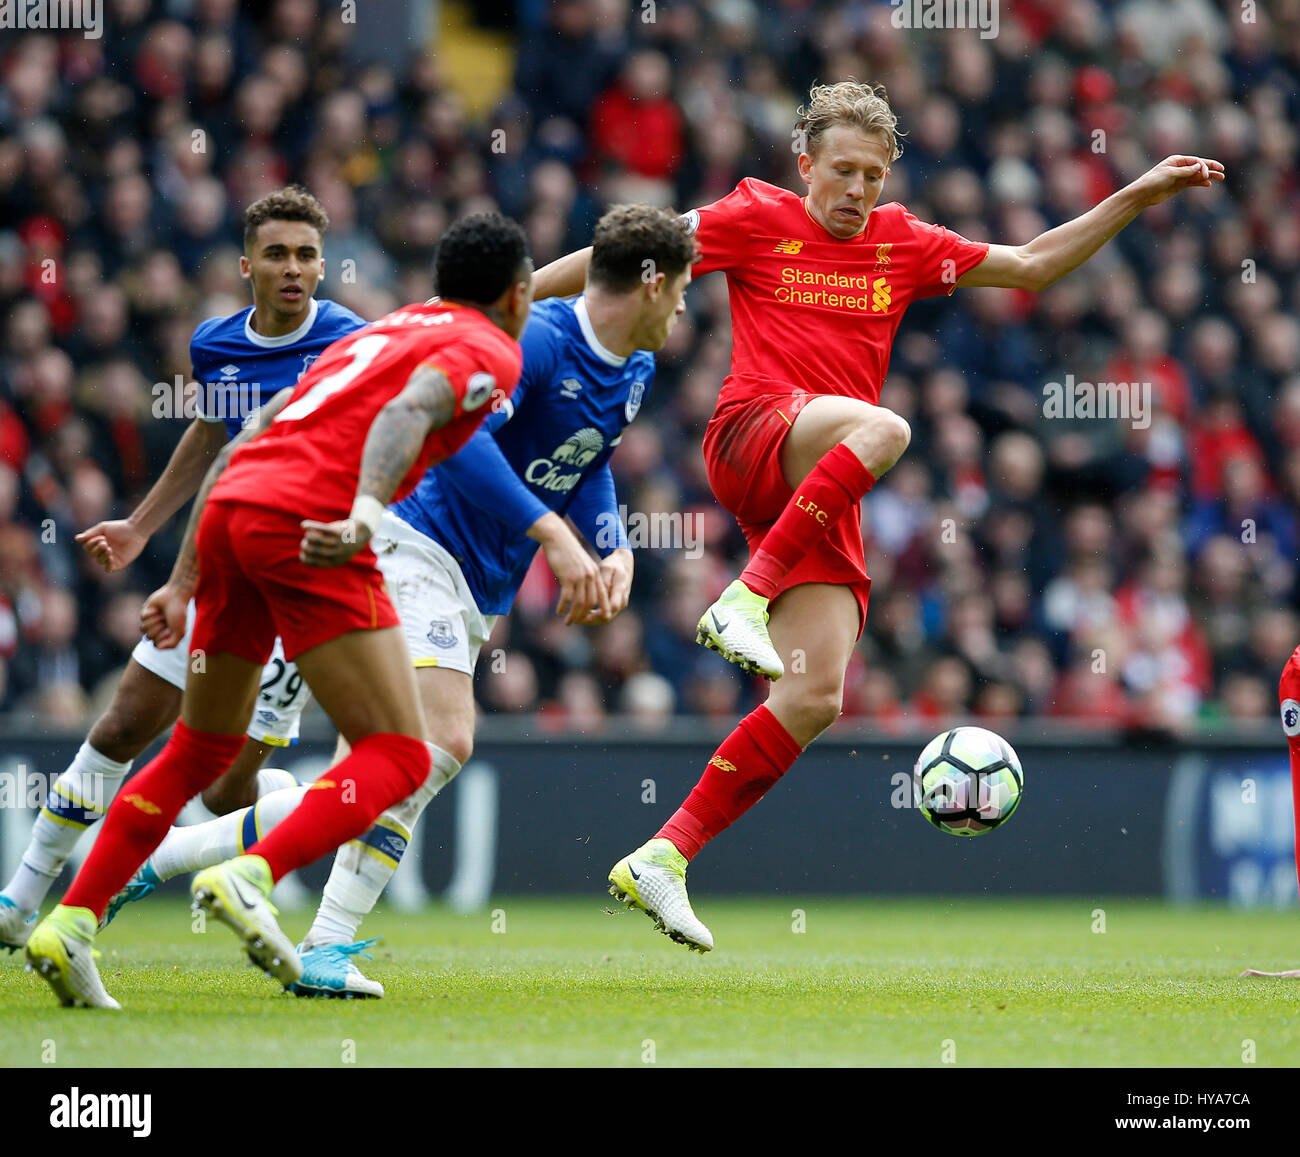 Liverpool, UK. 1st Apr, 2017. Lucas Leiva of Liverpool wins the ball during the English Premier League match at Anfield Stadium, Liverpool. Picture date: April 1st 2017. Pic credit should read: Simon Bellis/Sportimage Credit: csm/Alamy Live News Stock Photo